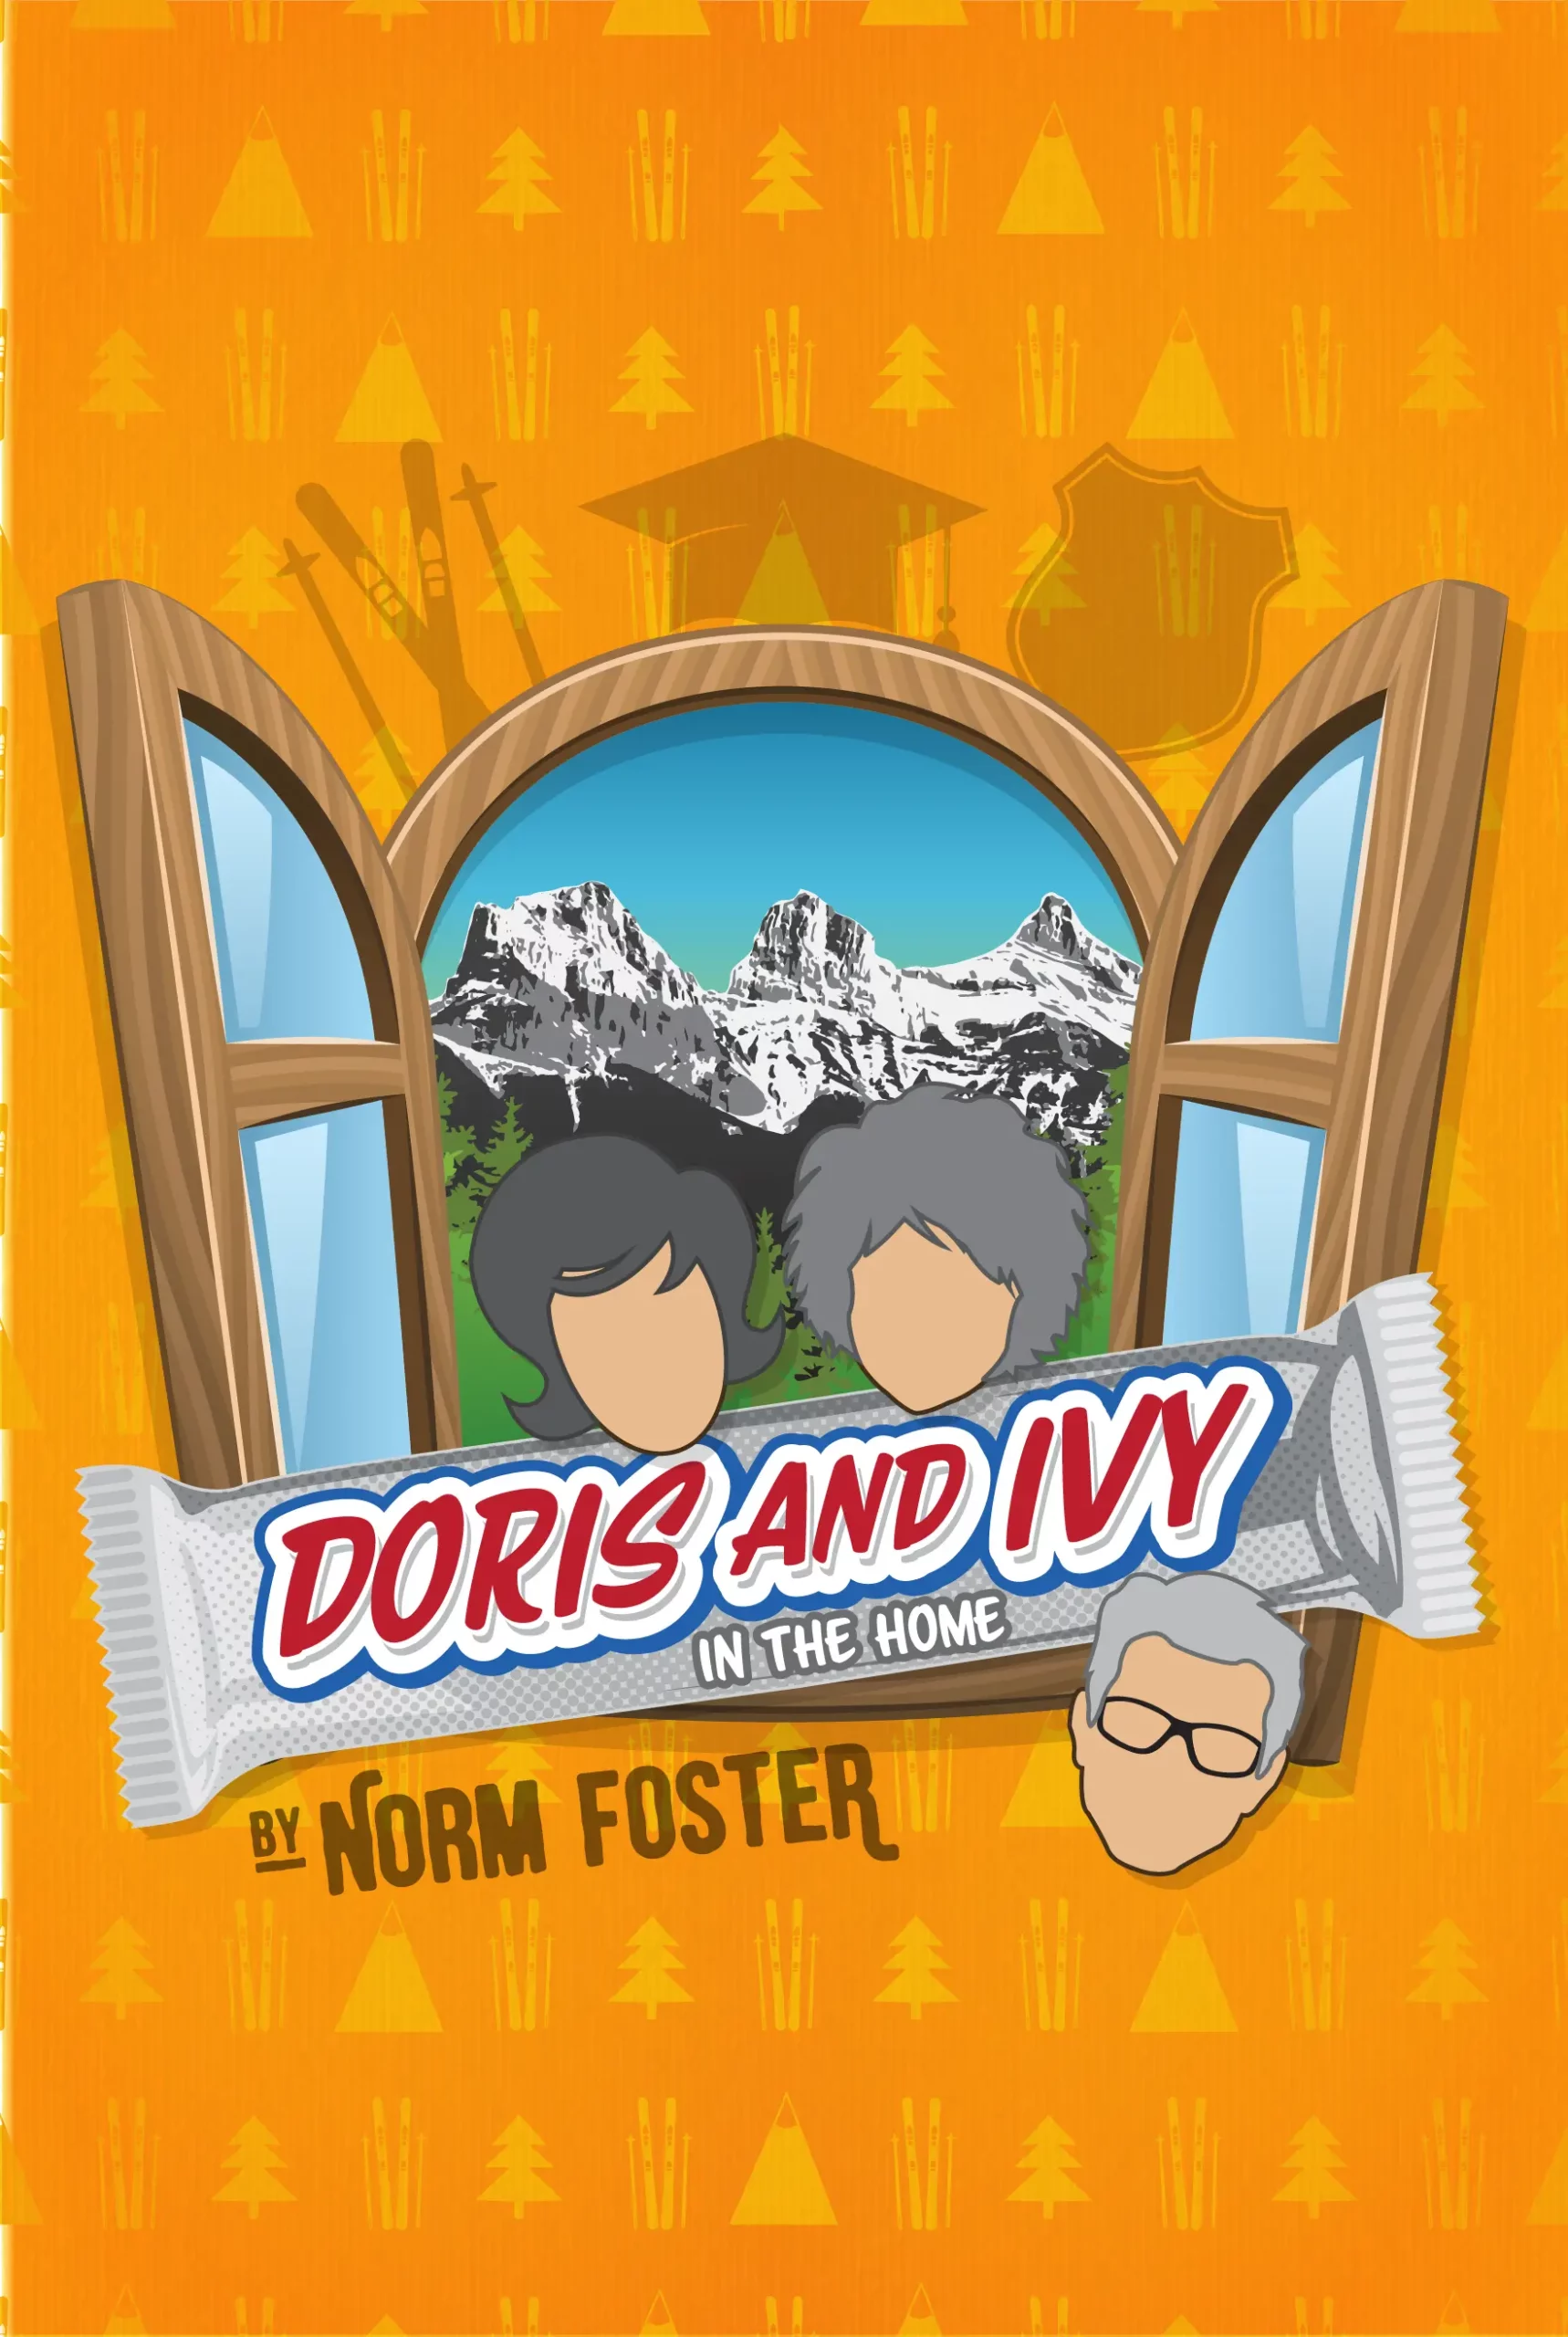 Doris & Ivy In the Home Lighthouse Theatre & Showboat Theatre